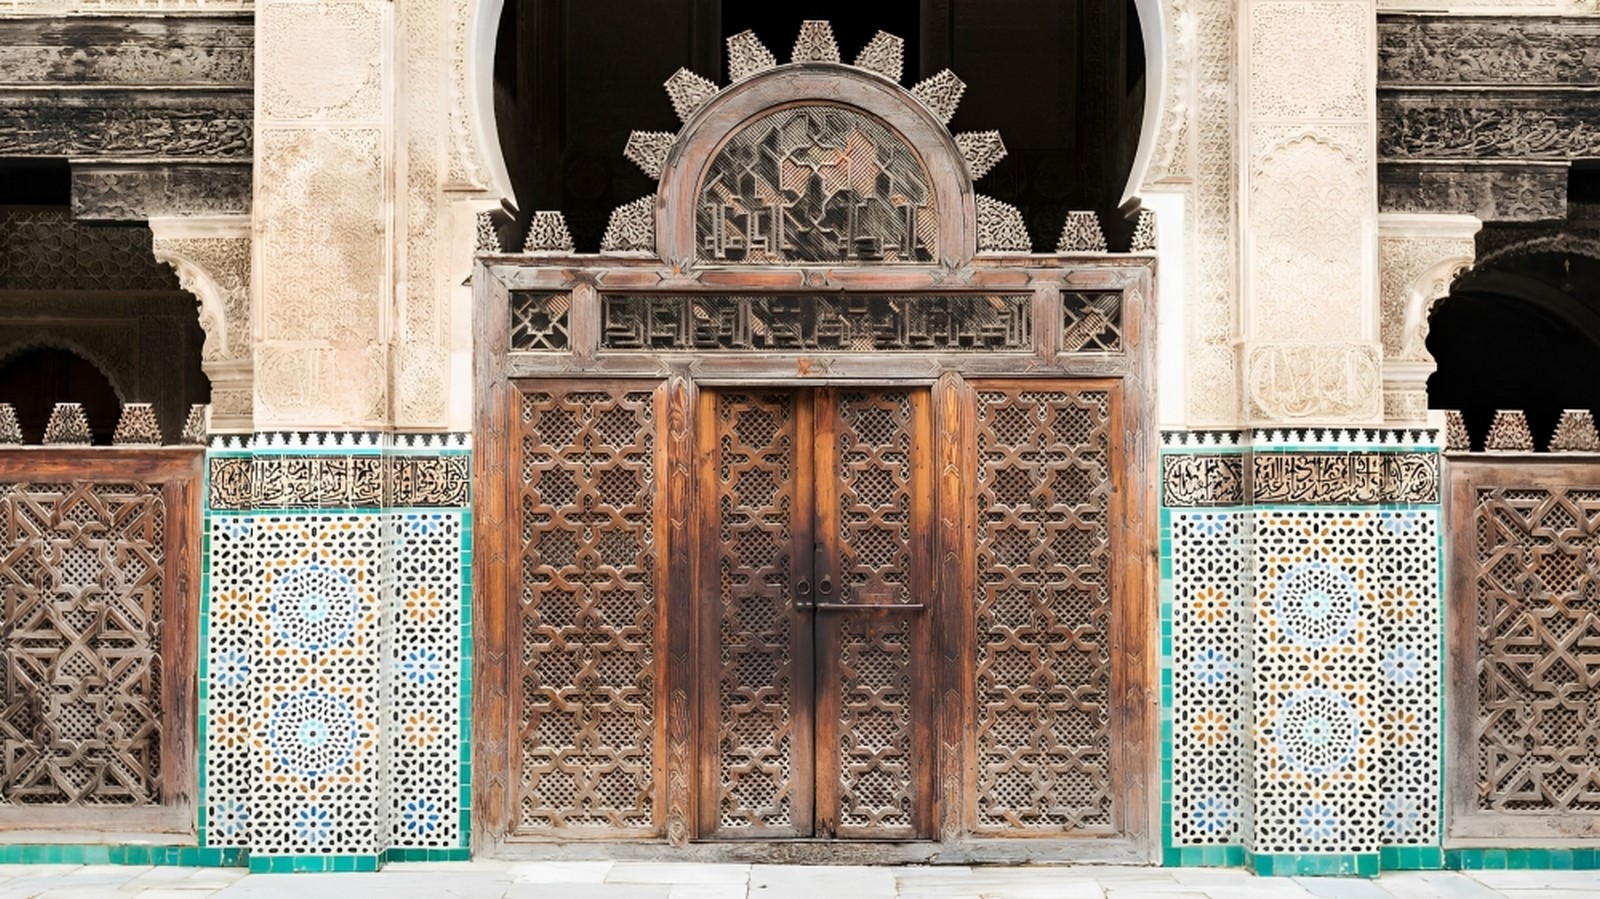 Architecture In Morocco: 15 Uniques Buildings Every Architect Must See - Sheet14